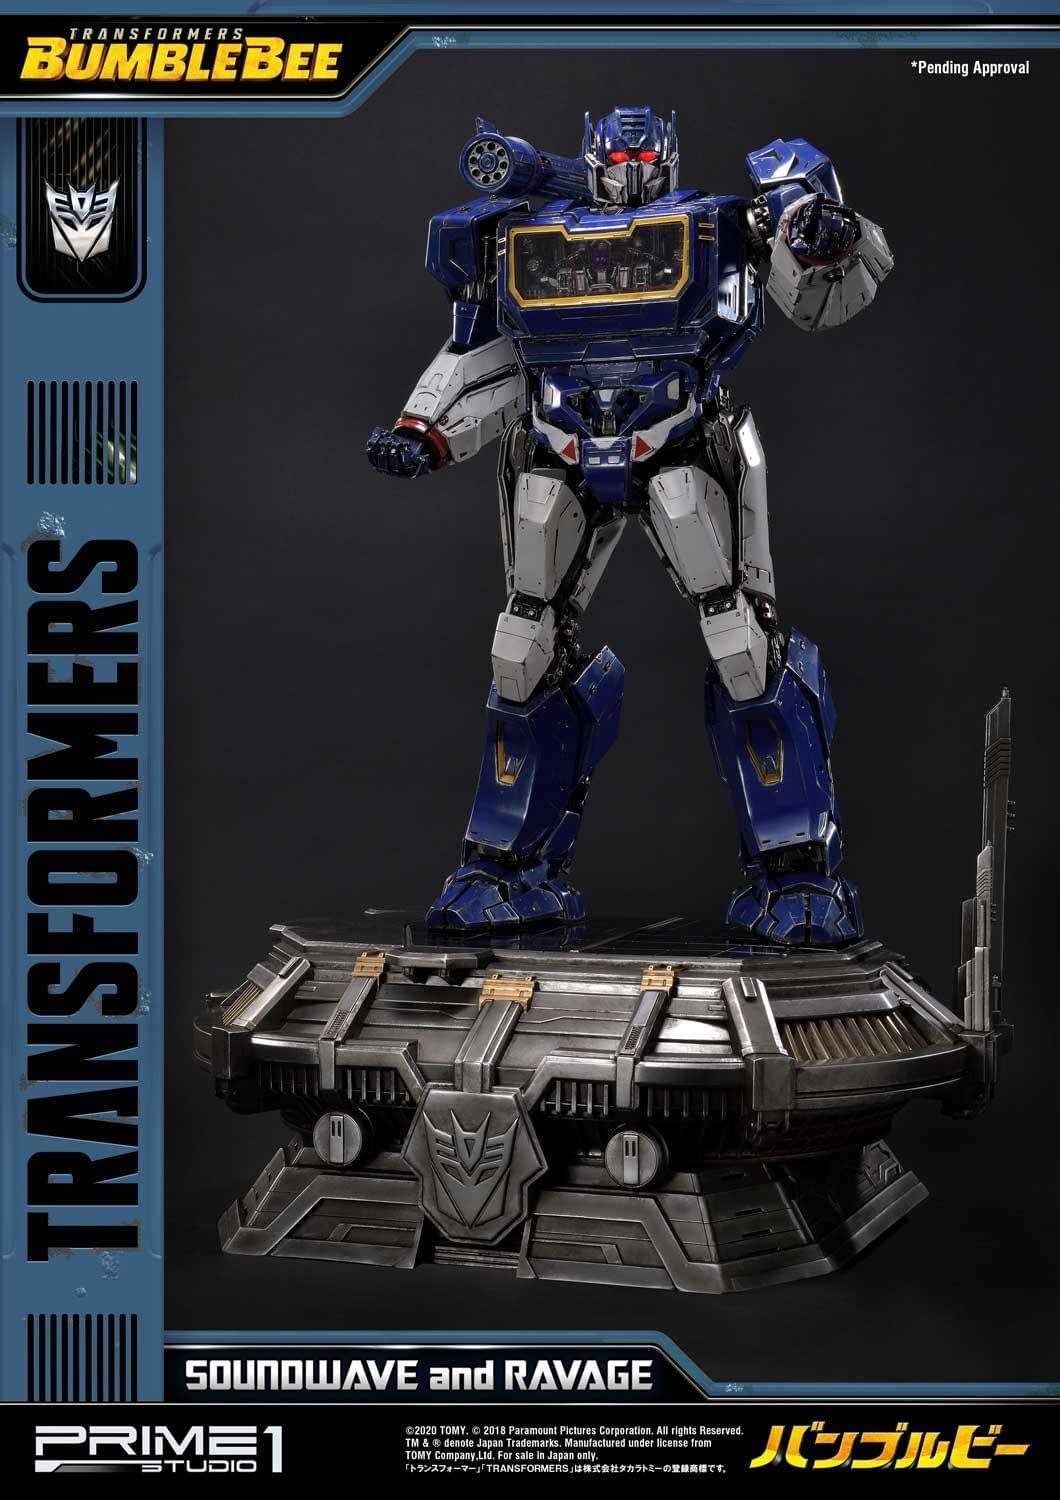 Transformers Soundwave and Ravage Get Expensive with Prime 1 Studio